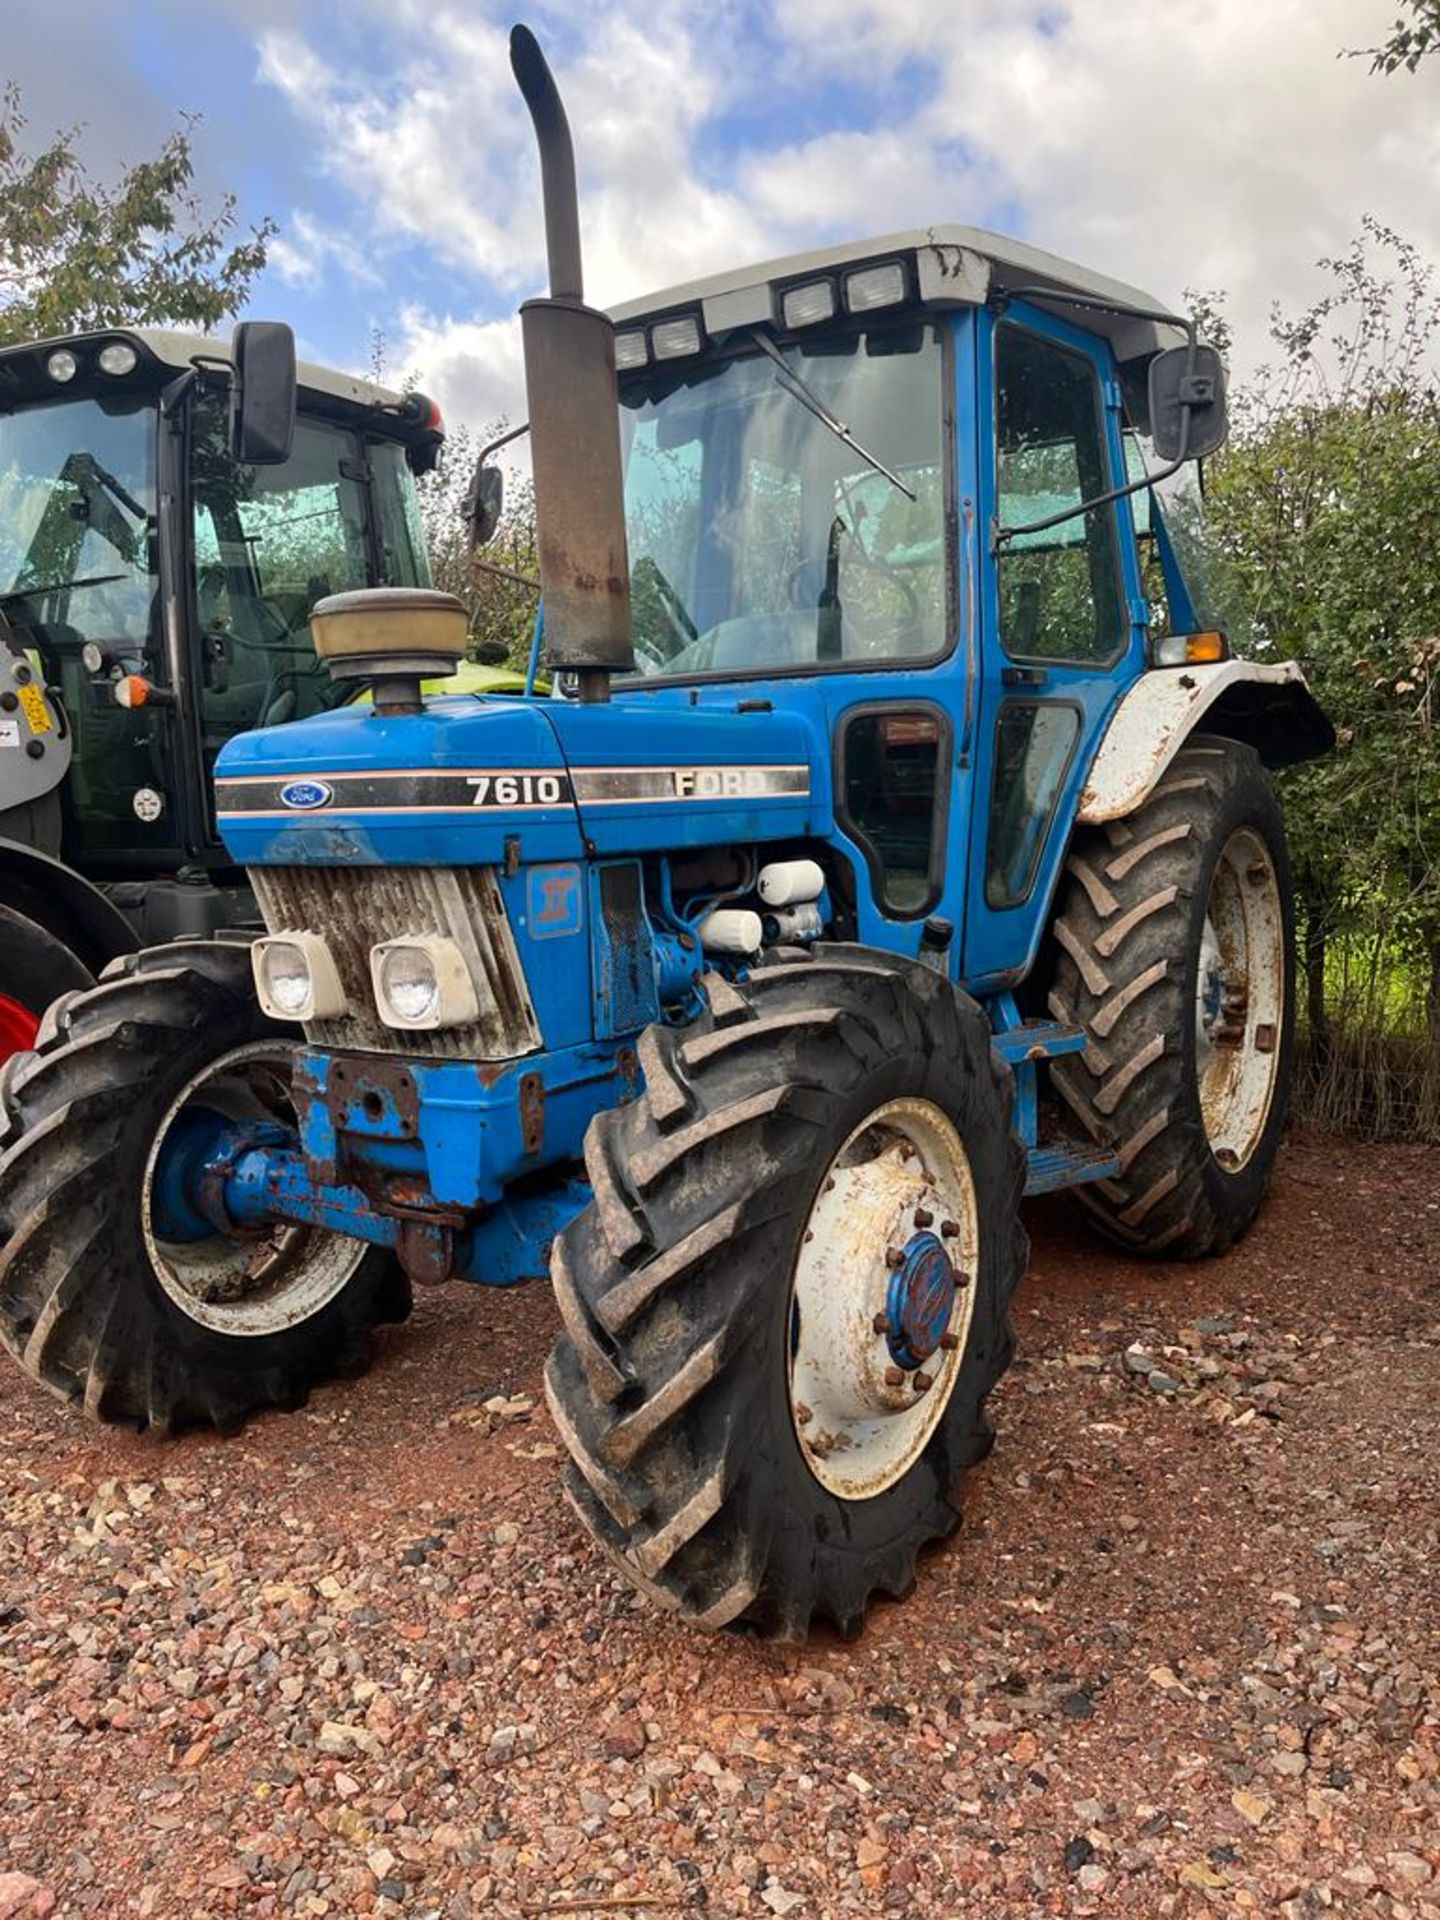 FORD 7610 TRACTOR 7,886 HOURS